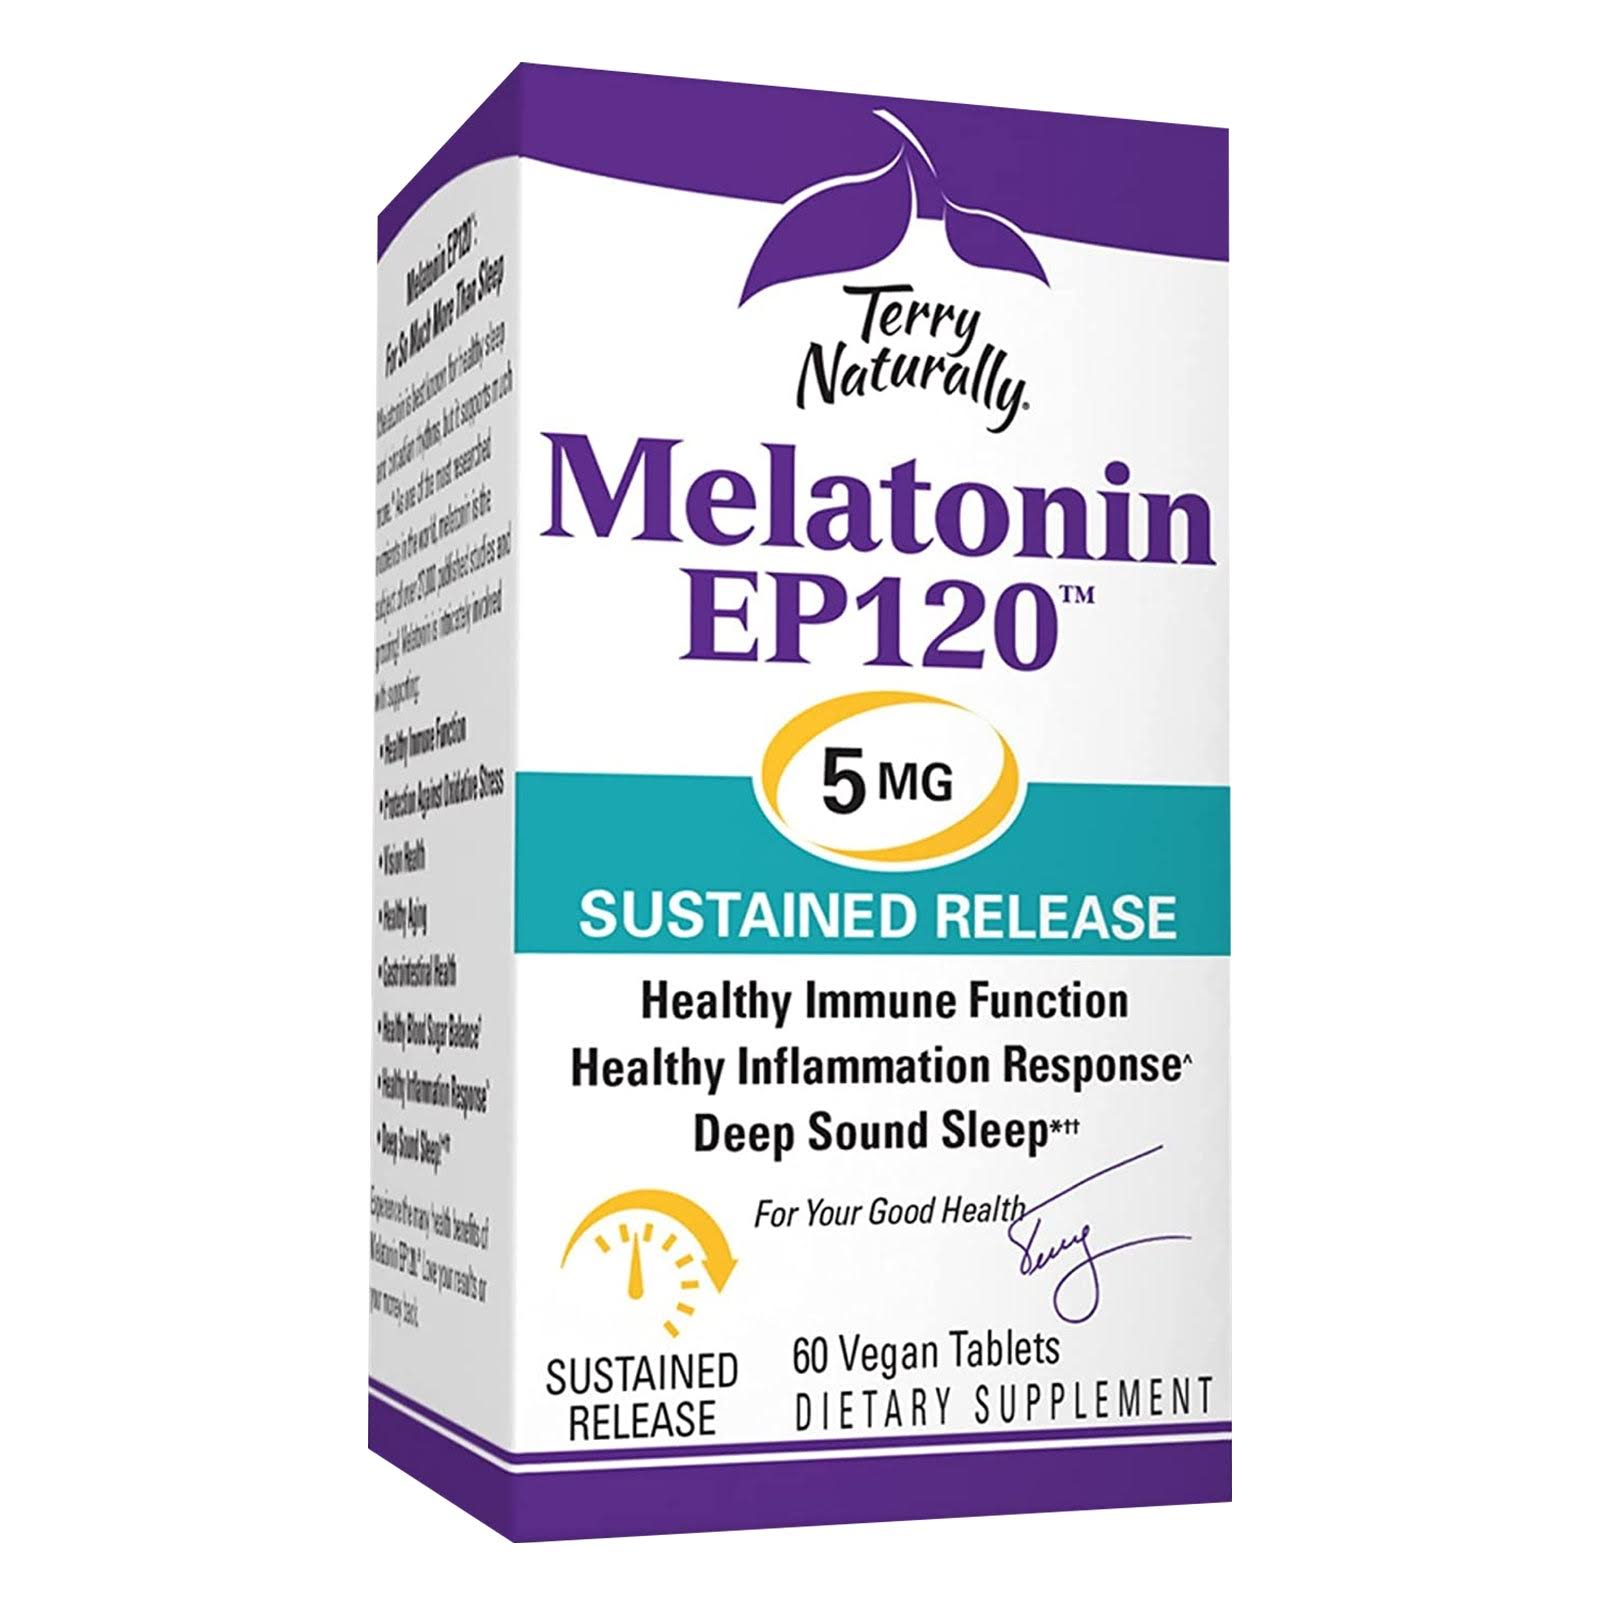 Melatonin EP120 5 mg Sustained Release, 60 Vegan Tablets, Terry Naturally